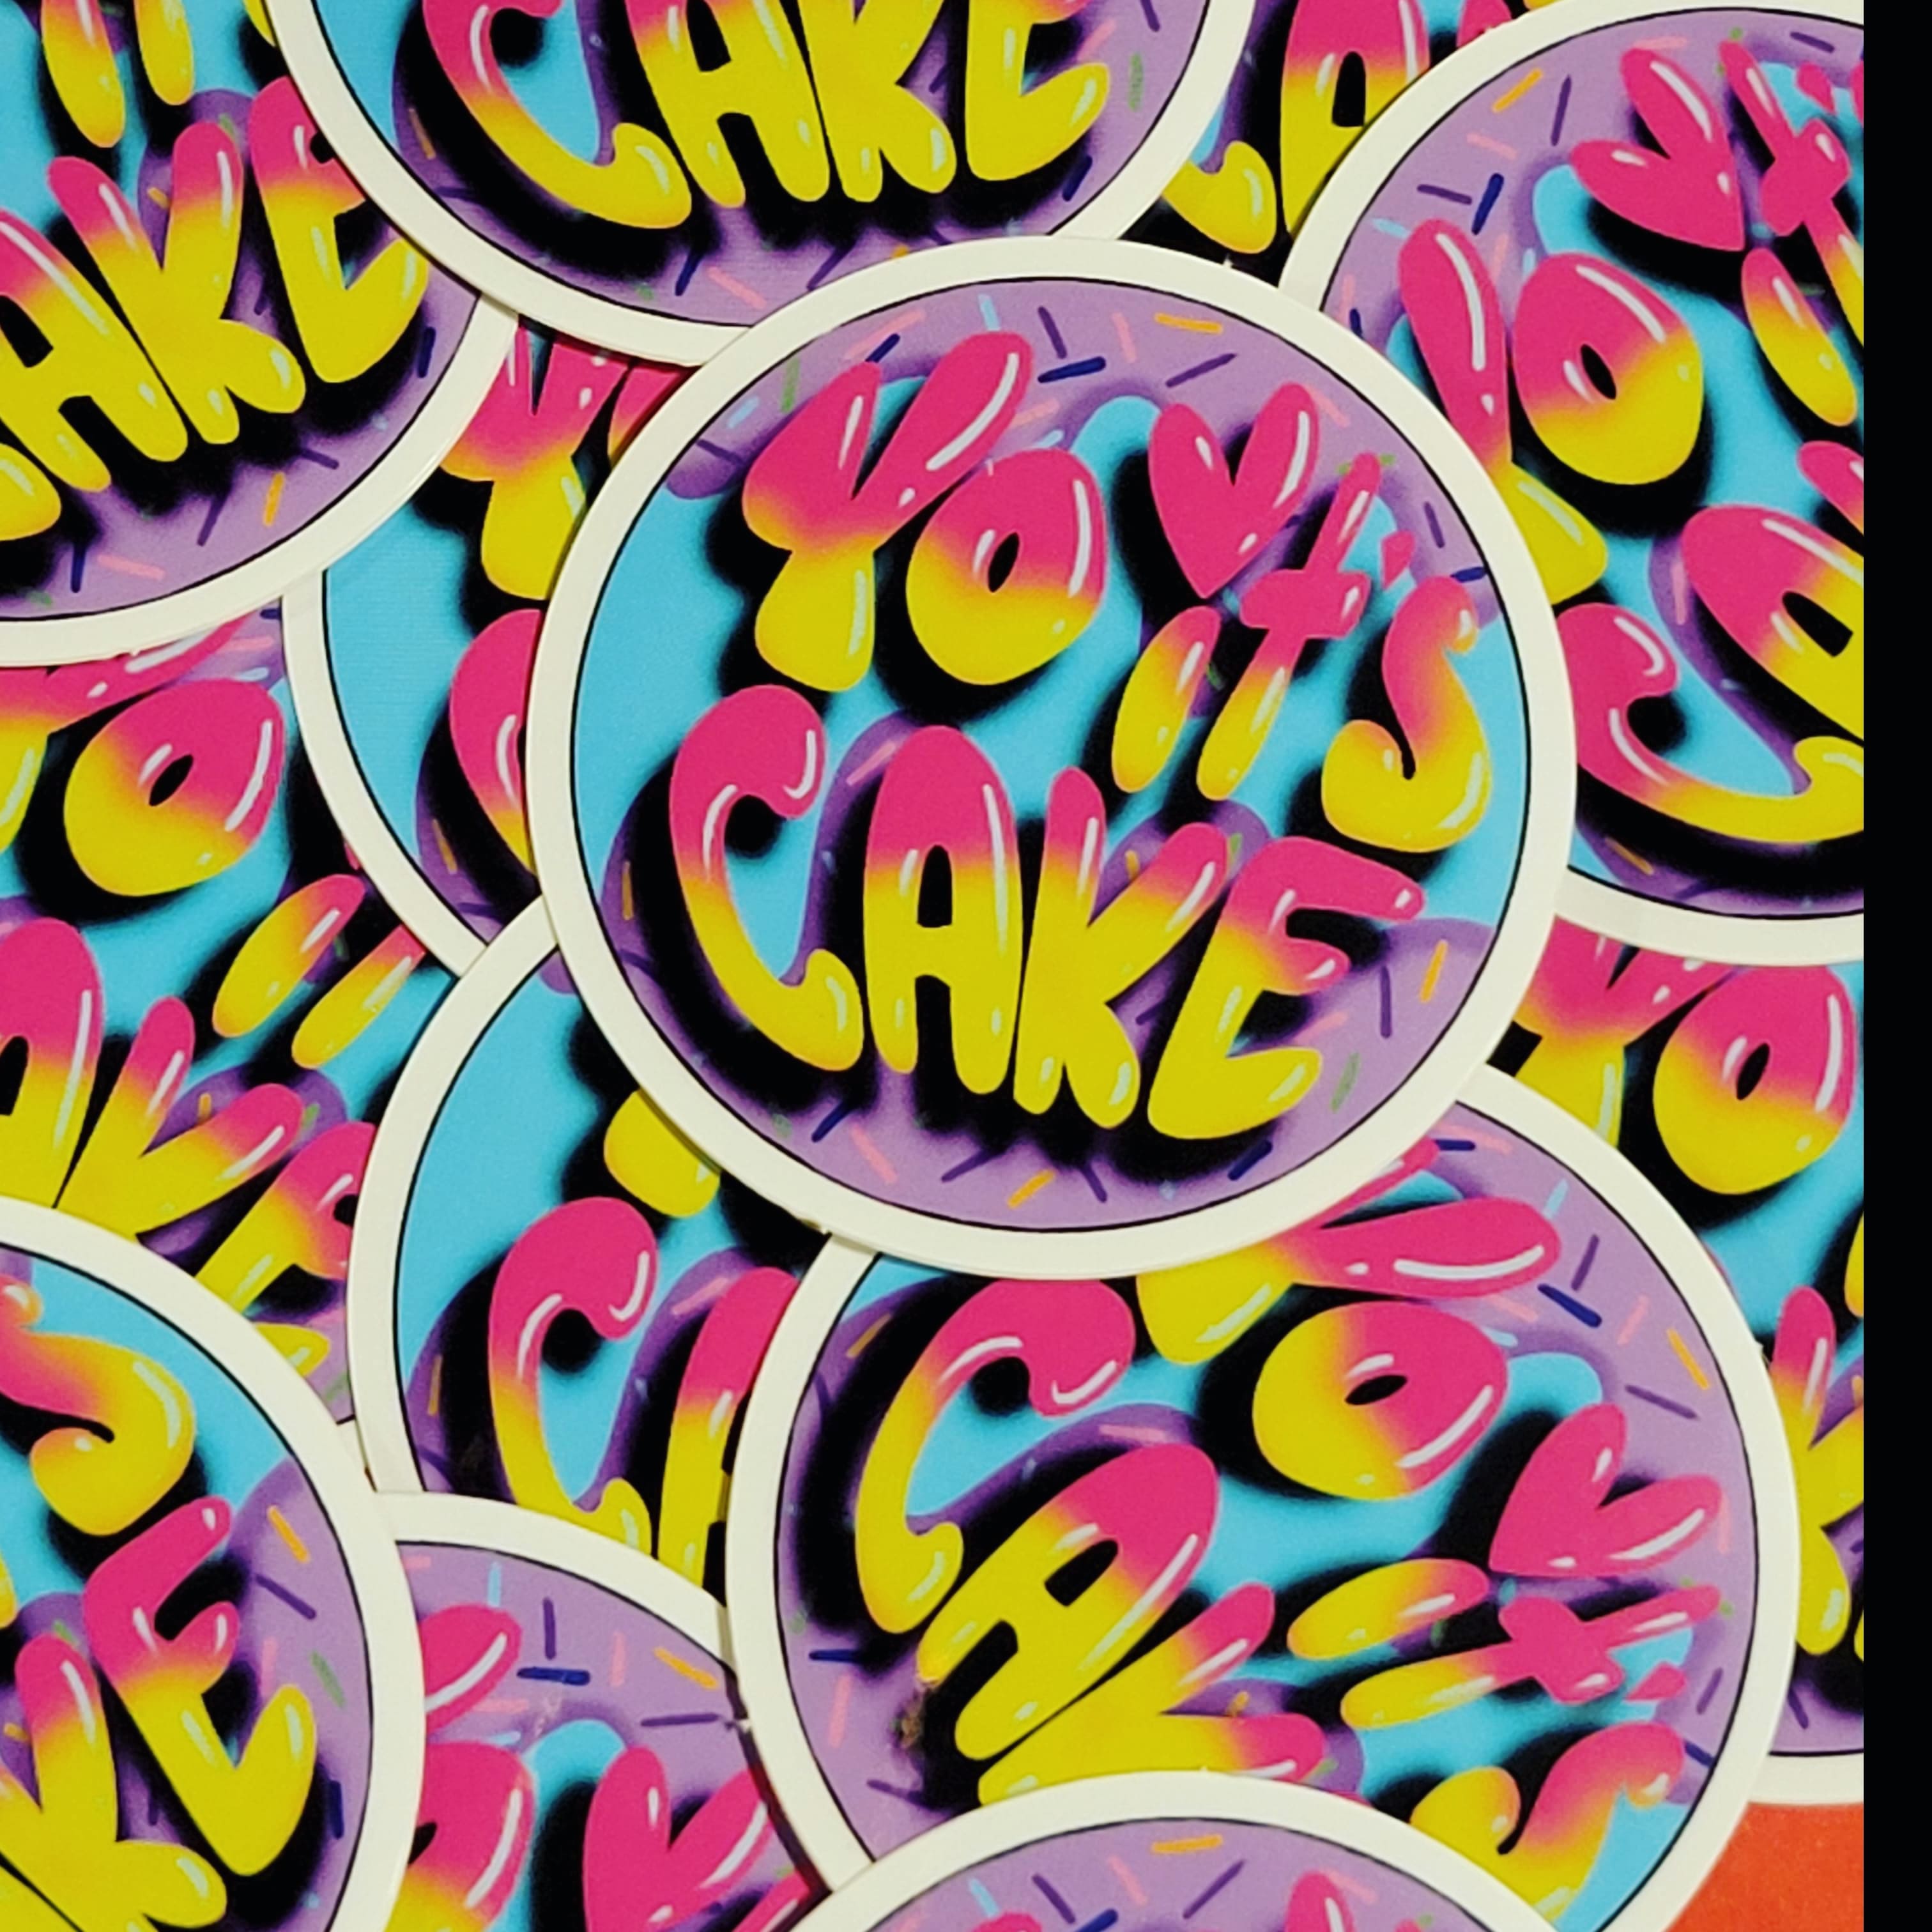 Photo of several "yo its cake" logo stickers in a layered pile.